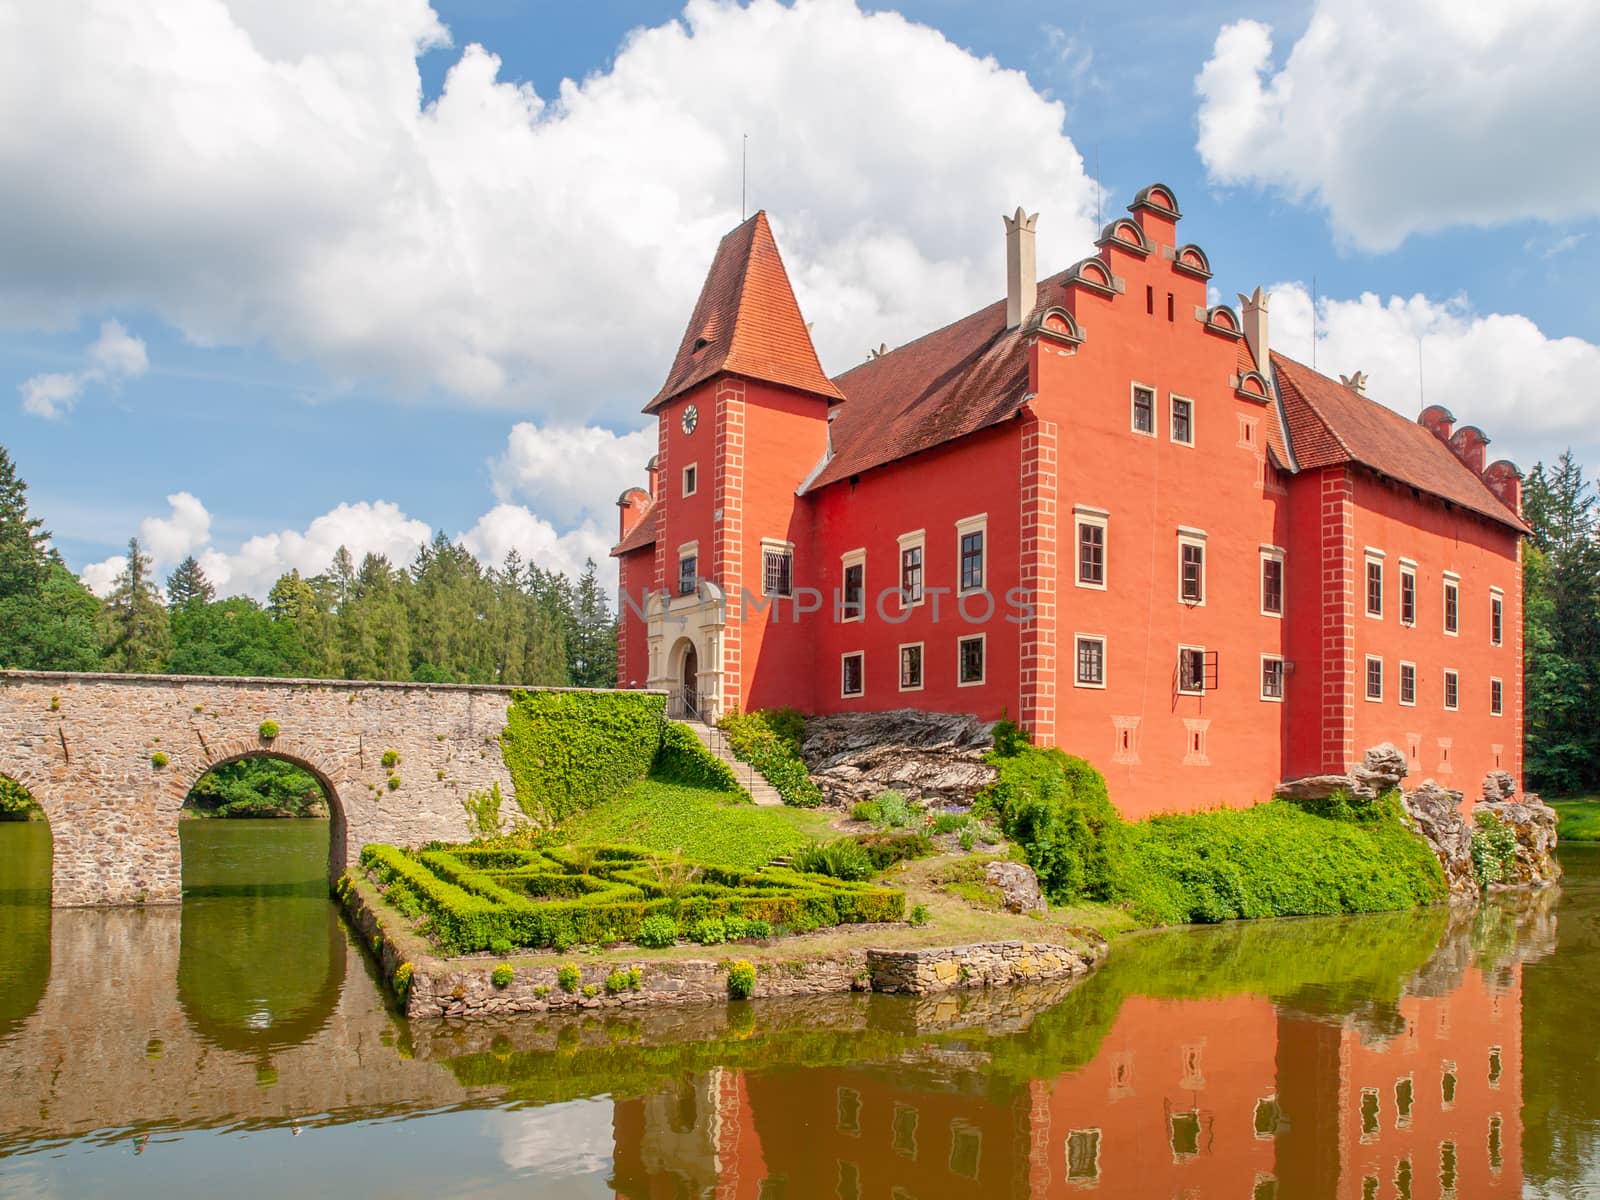 Renaissance chateau Cervena Lhota in Southern Bohemia, Czech Republic. Idyllic and picturesque fairy tale castle on the small island reflected in the romantic lake.